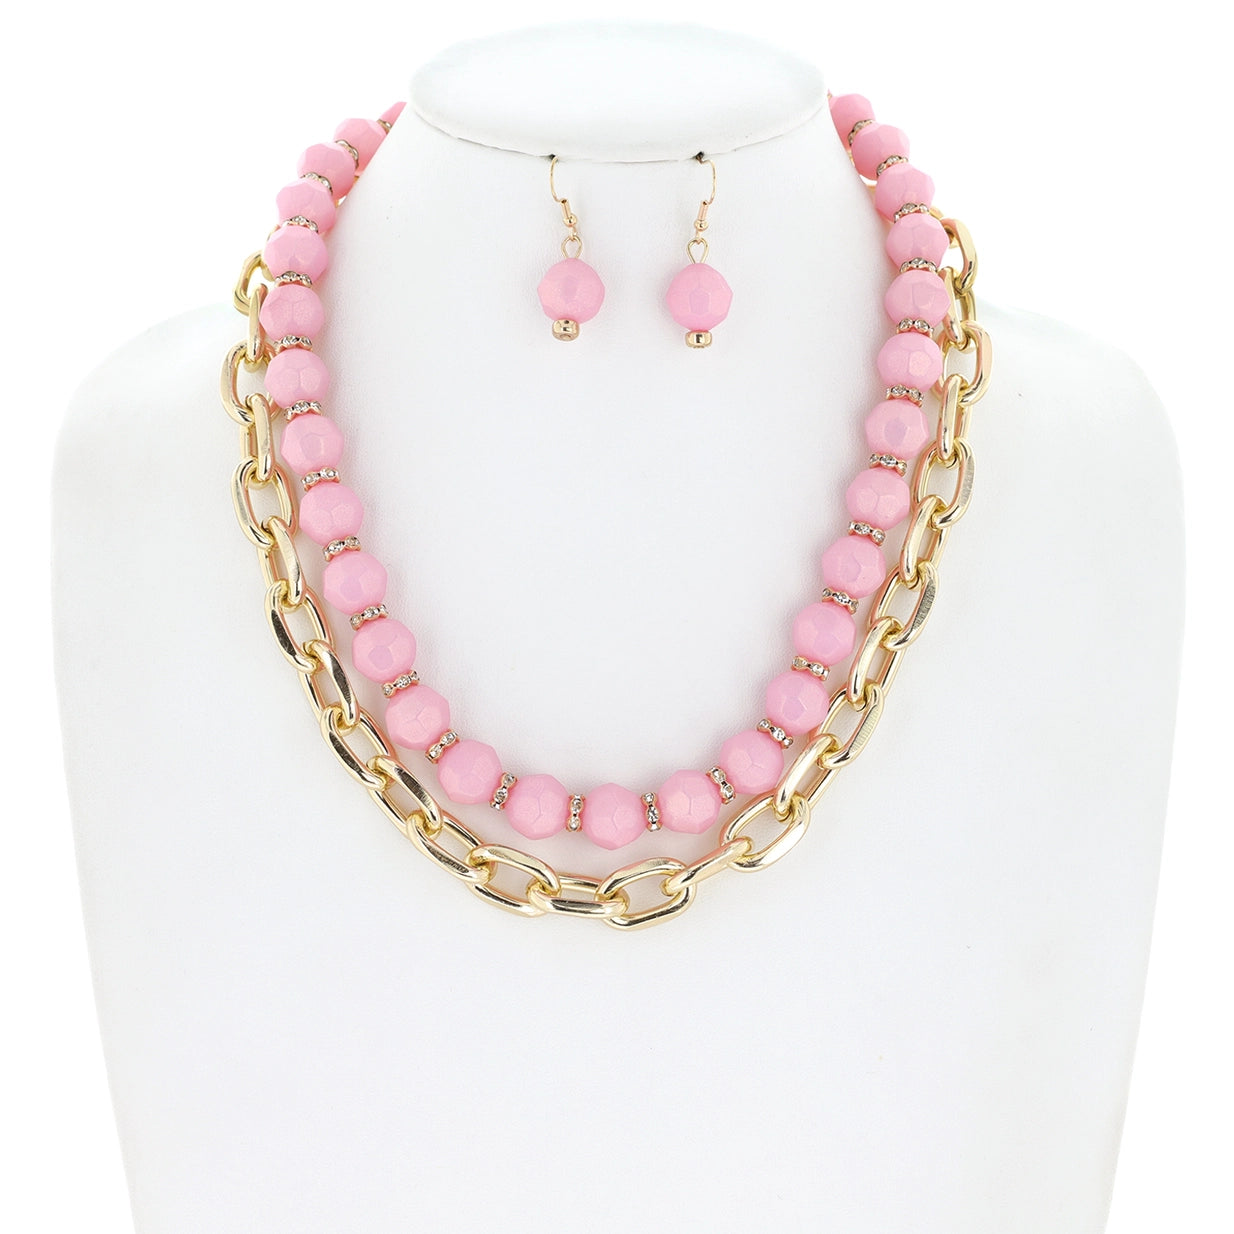 2 Layer Large Beaded & Chain Link Necklace Set